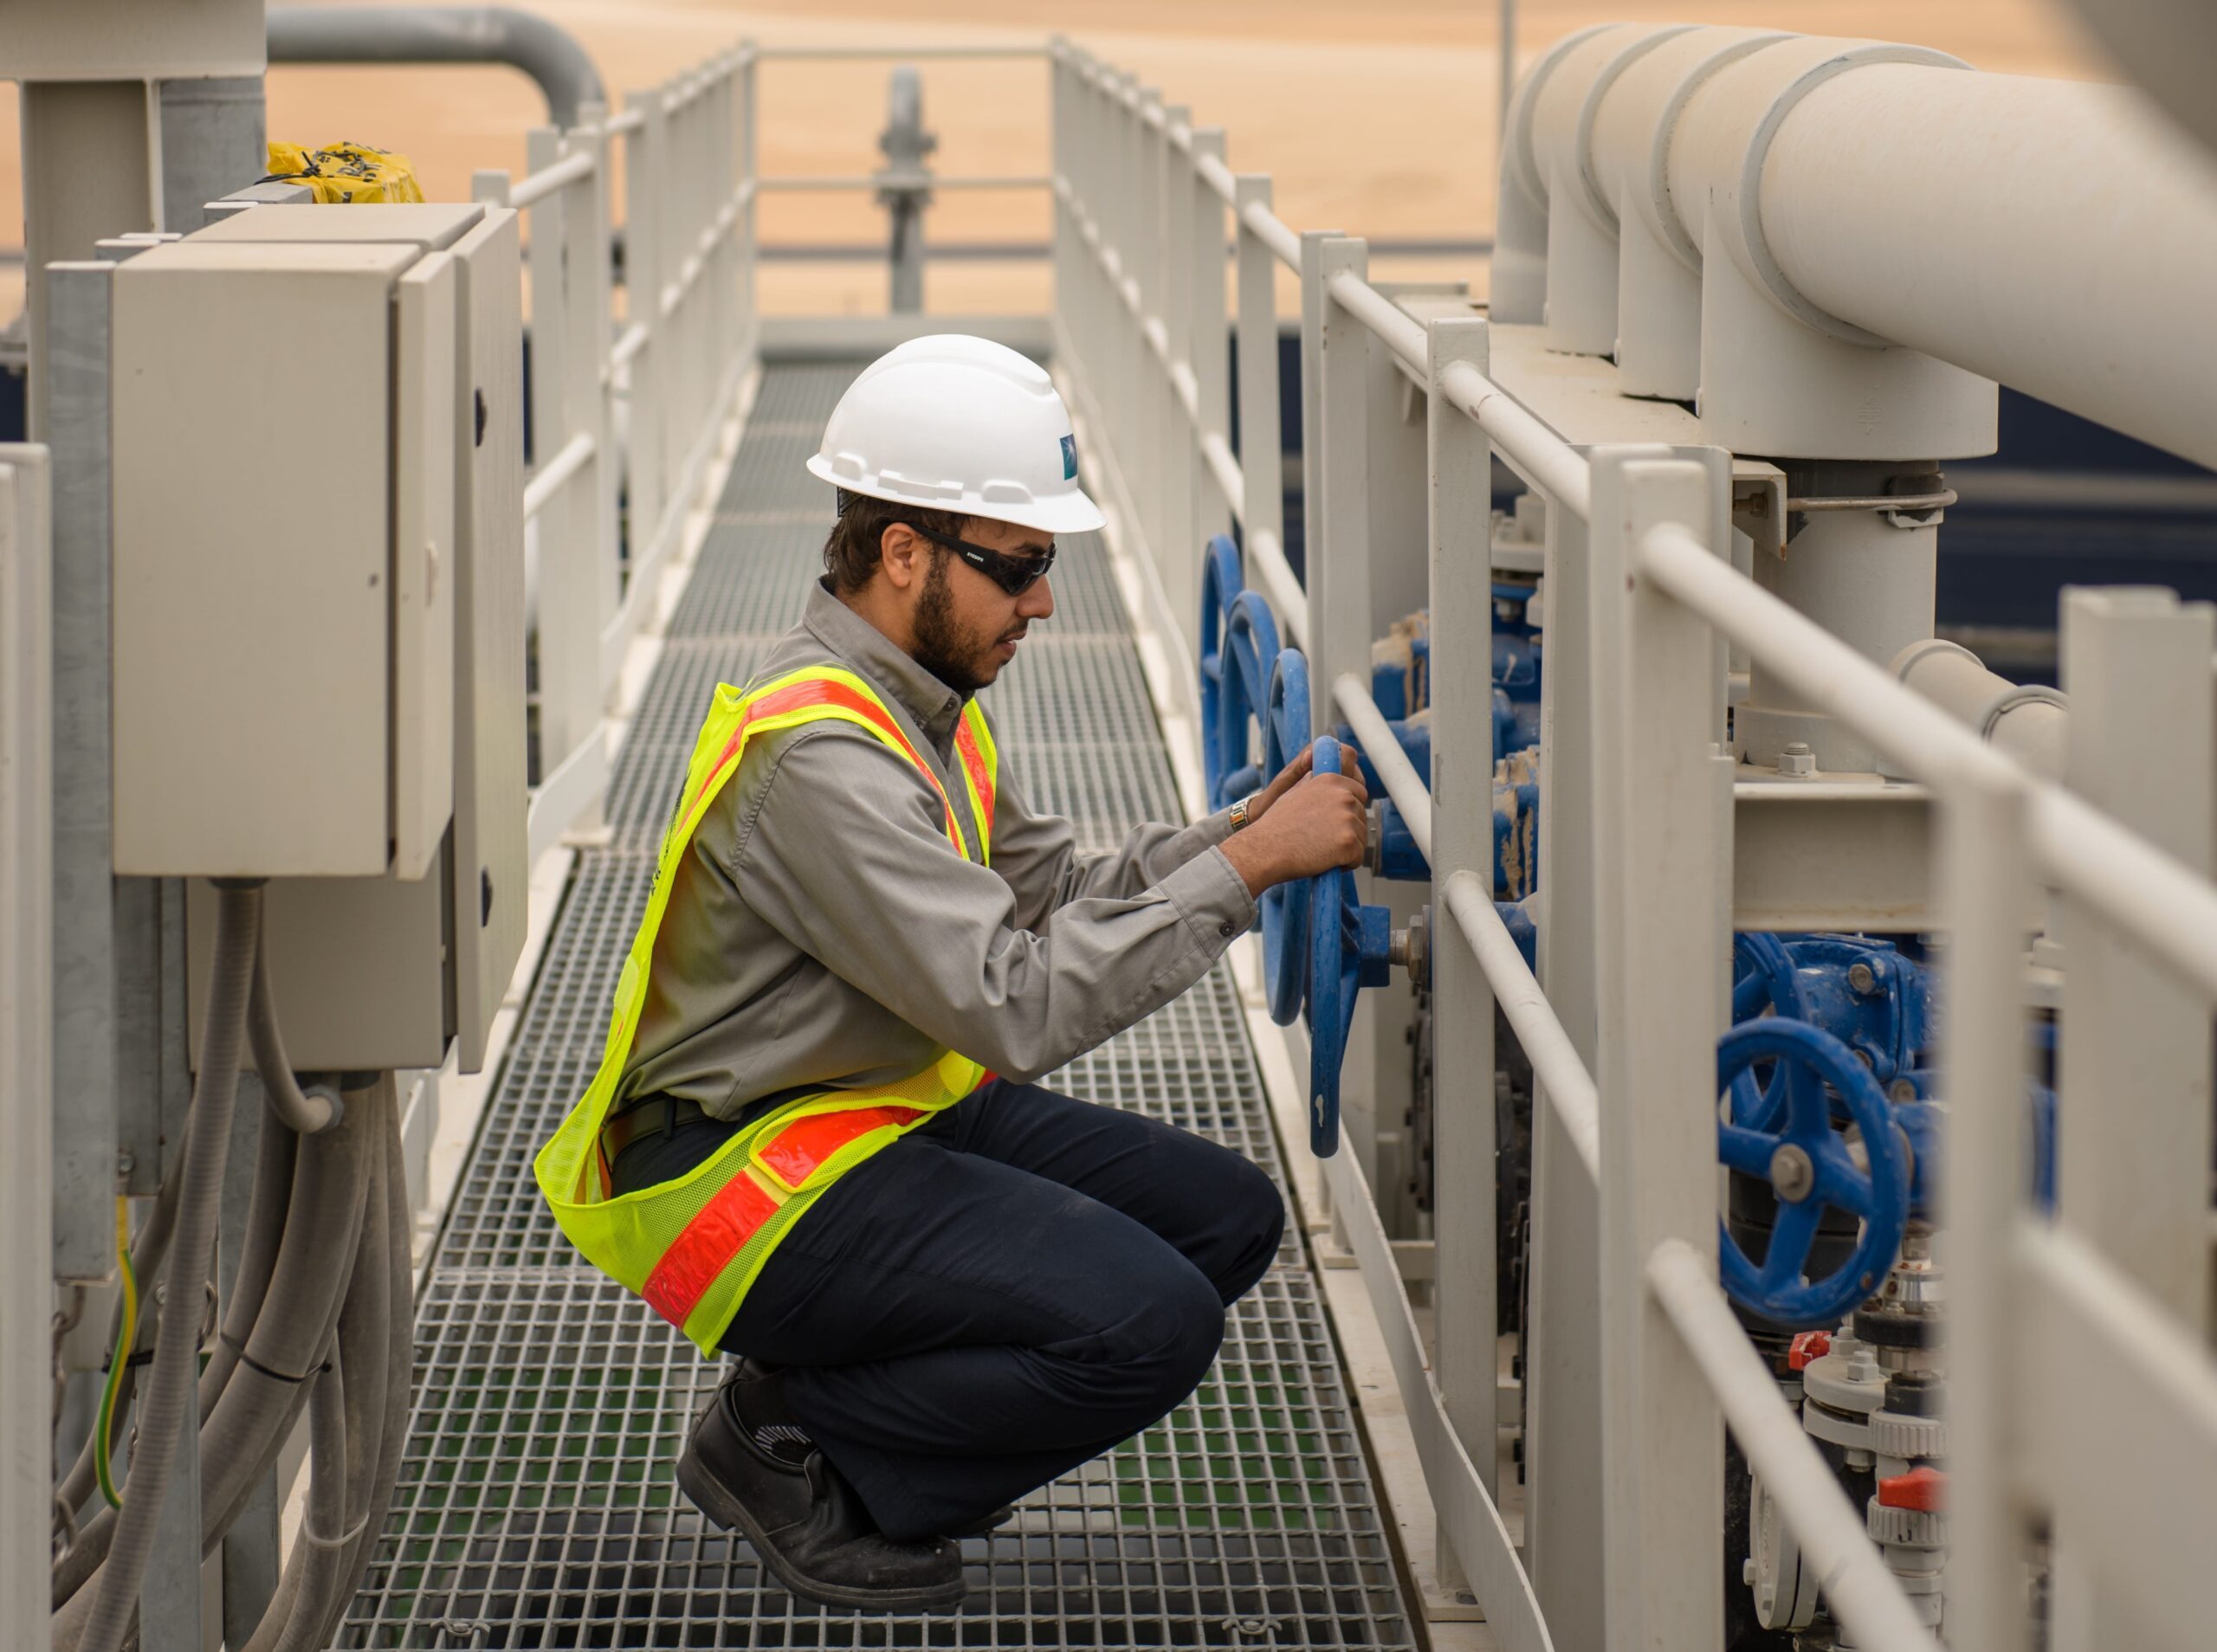 An employee at Aramco's Fadhili gas plant. The upgraded master gas system is intended to meet Saudi Arabia's growing domestic demand